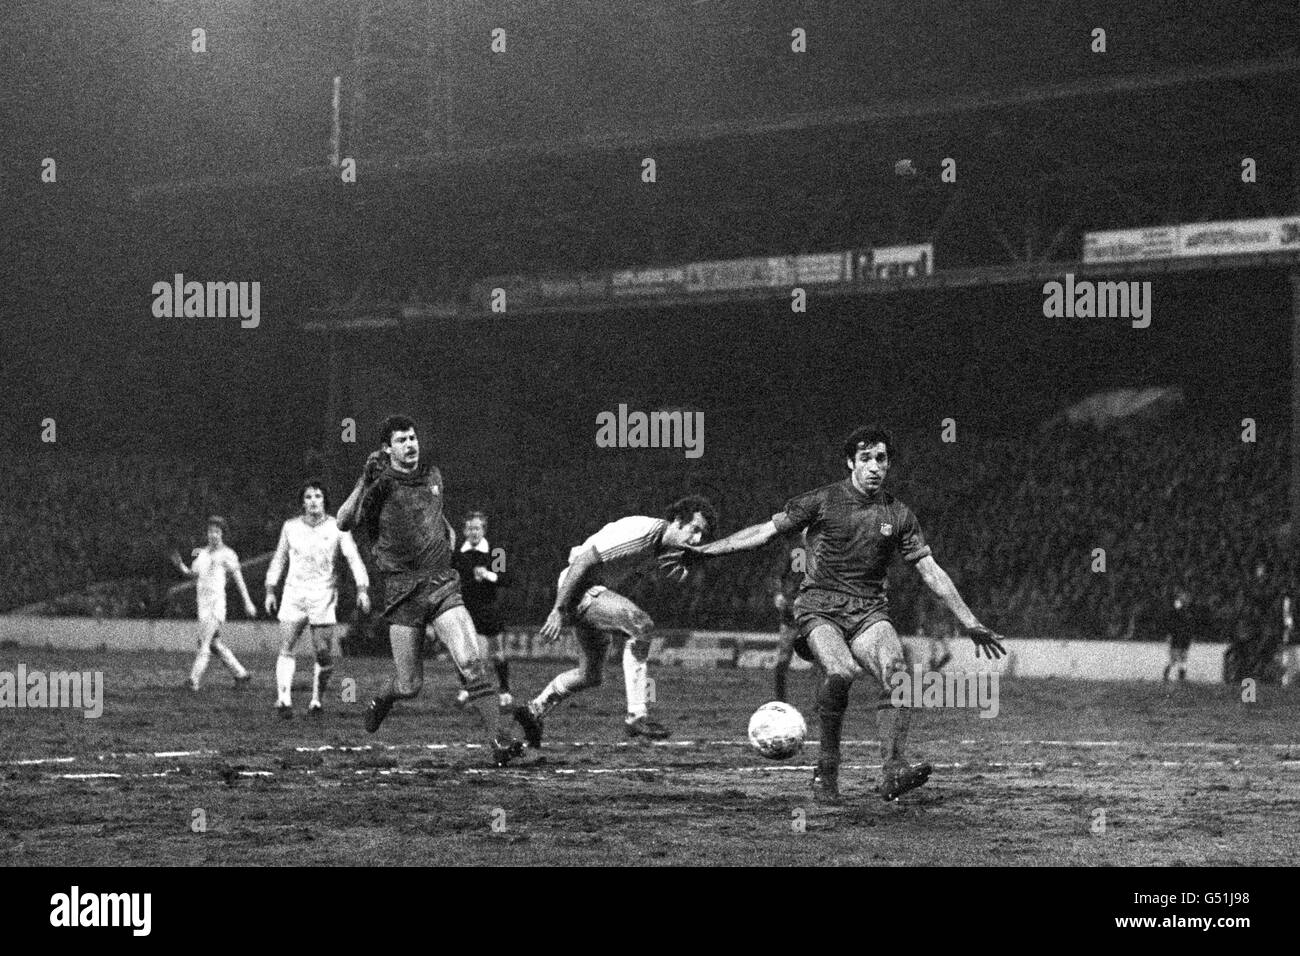 Soccer - UEFA Super Cup - First Leg - Nottingham Forest v Barcelona - City Ground. Nottingham Forest's Trevor Francis (c) heads the ball between Barcelona's Juan Serrat and Miquel Blanqueti. The game finished 1-0 to Forest. Stock Photo